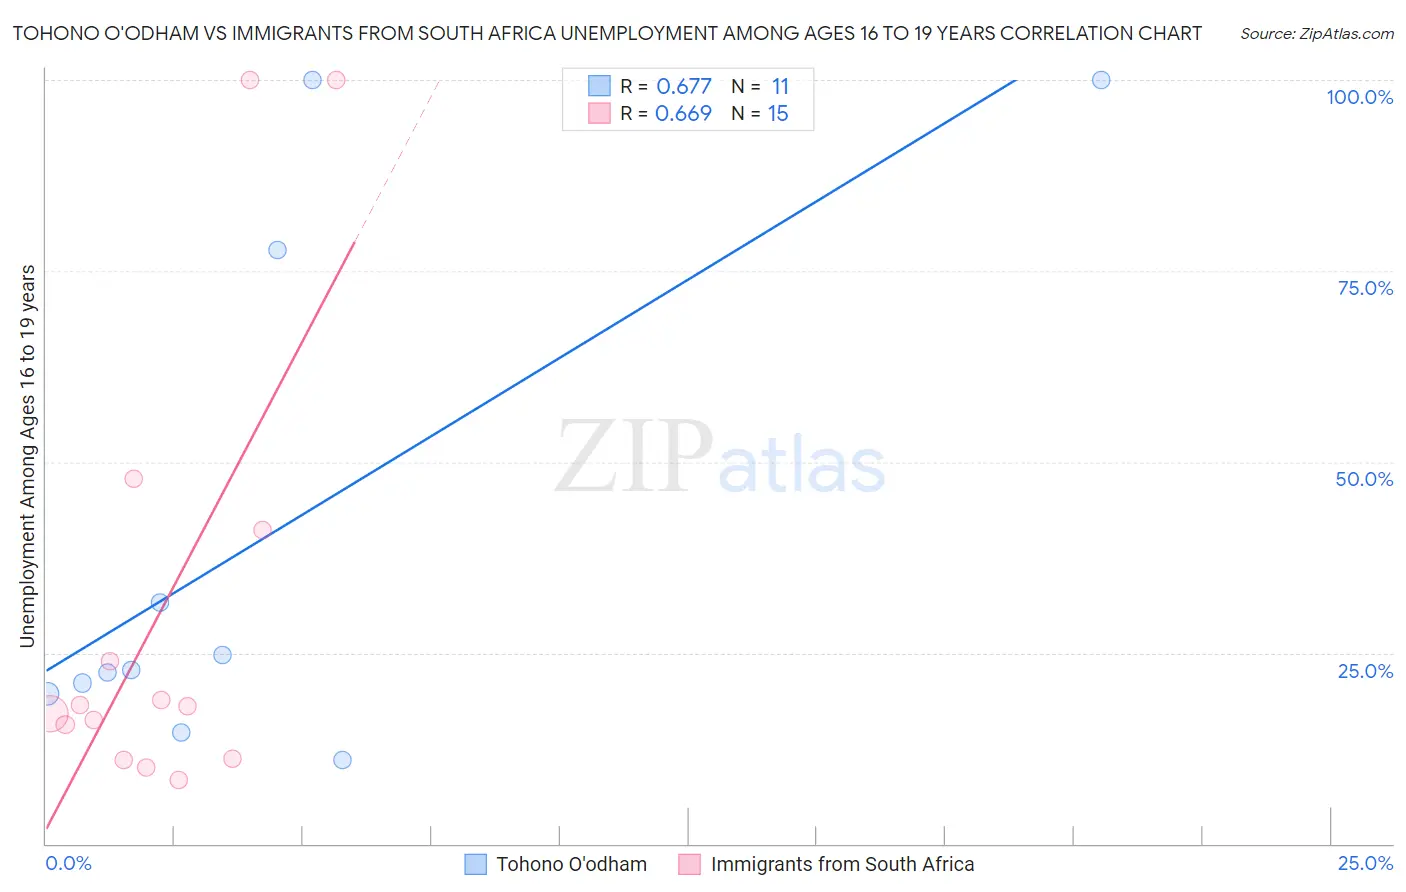 Tohono O'odham vs Immigrants from South Africa Unemployment Among Ages 16 to 19 years